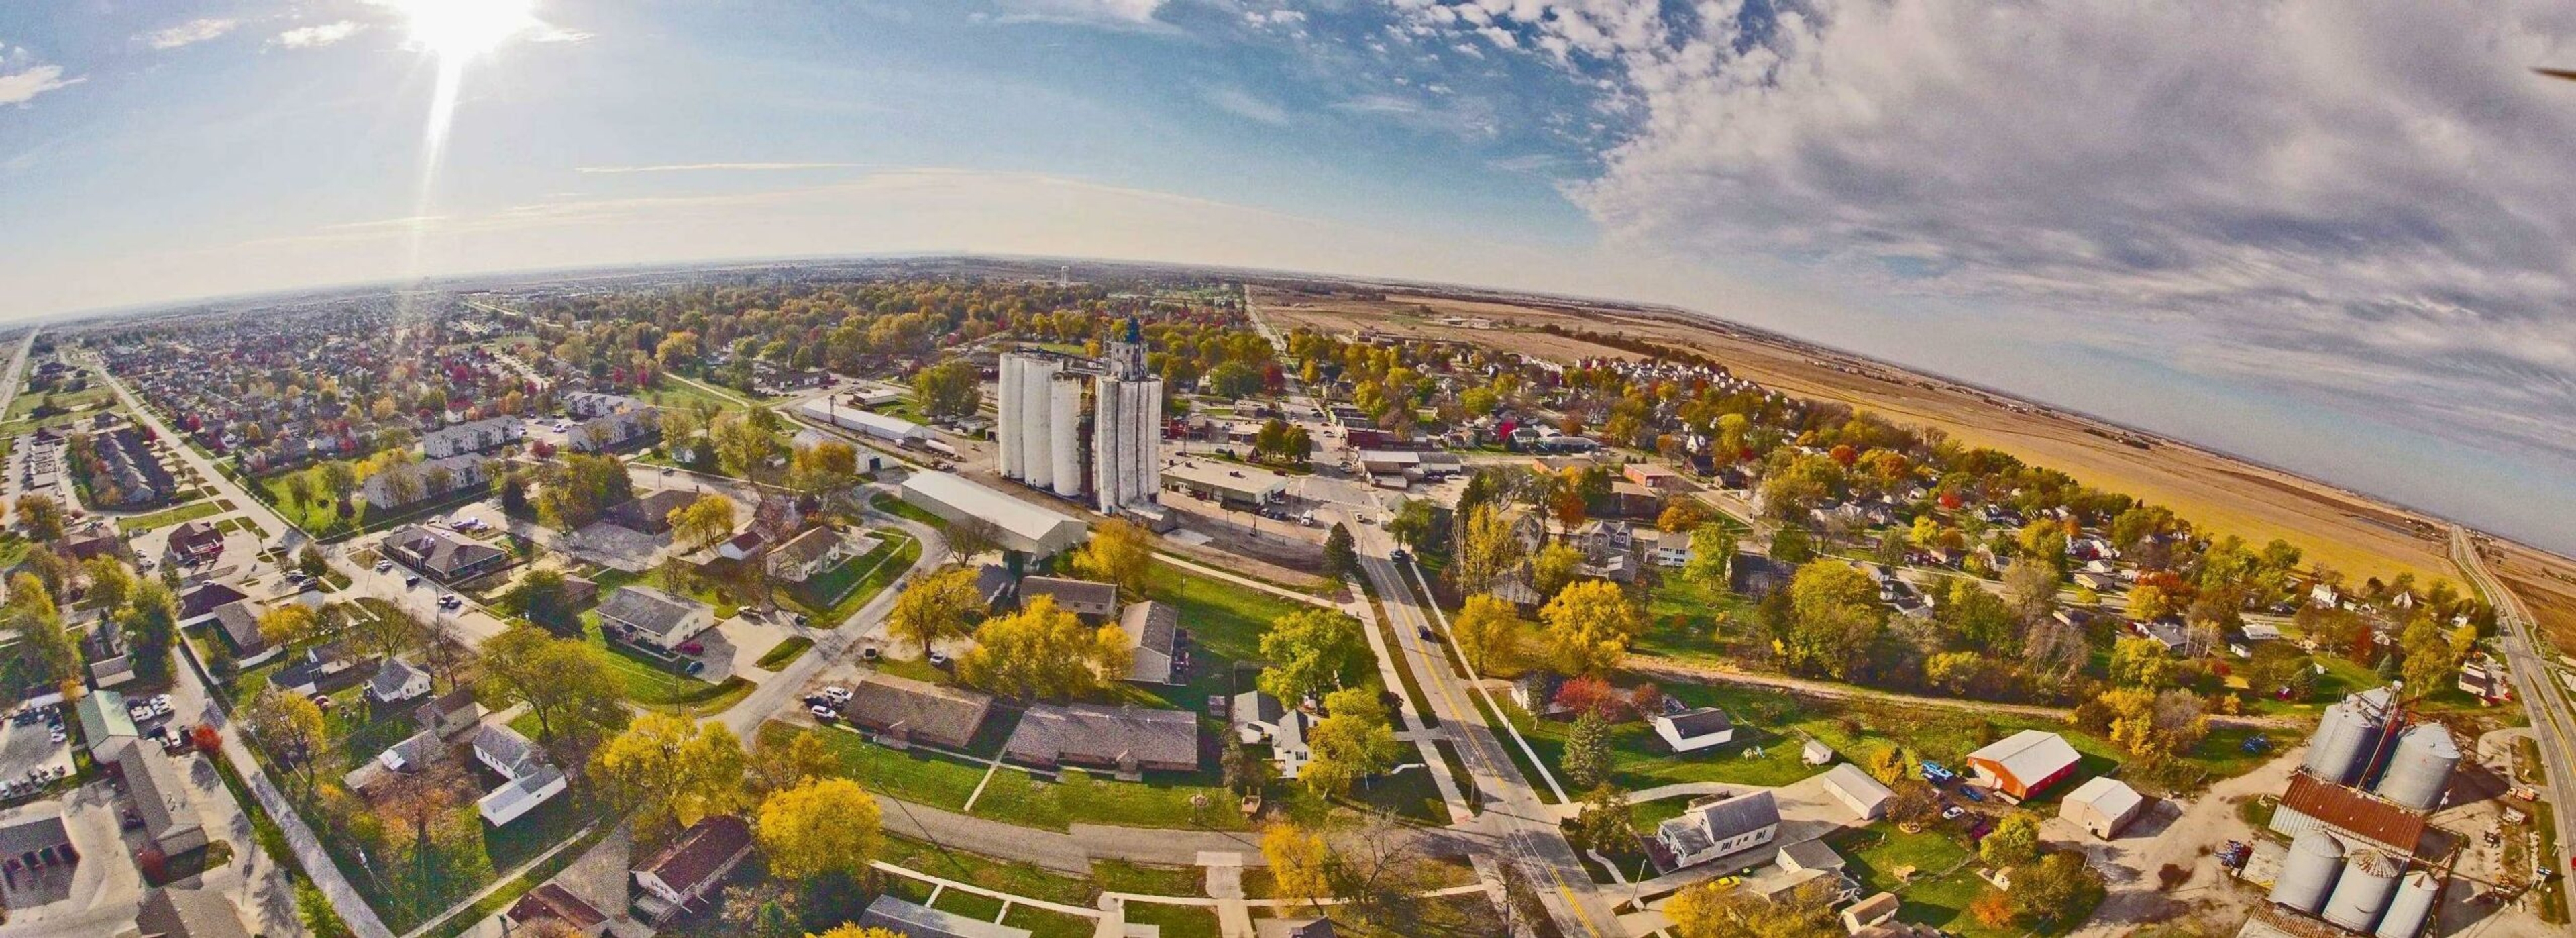 Waukee, IA: Your Ultimate Guide to Fun and Adventure in the Heart of Iowa